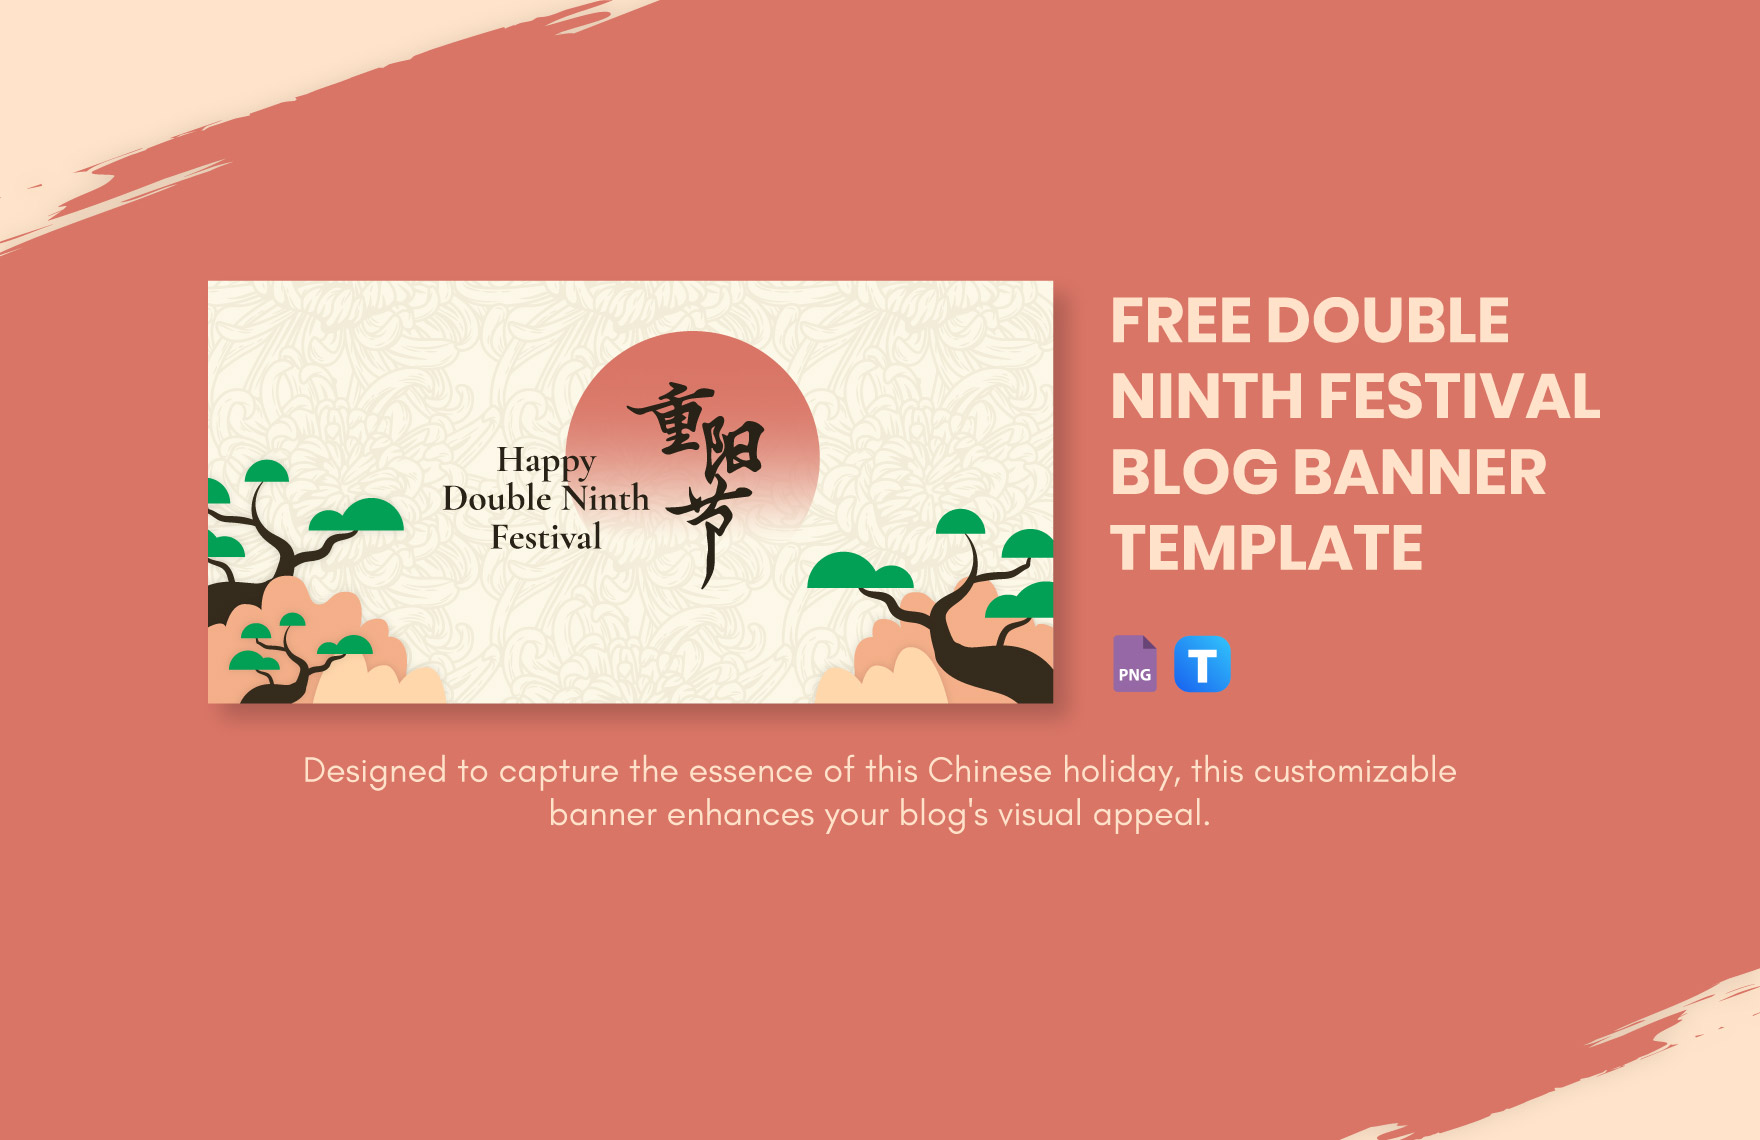 Free Double Ninth Festival Blog Banner Template in PNG